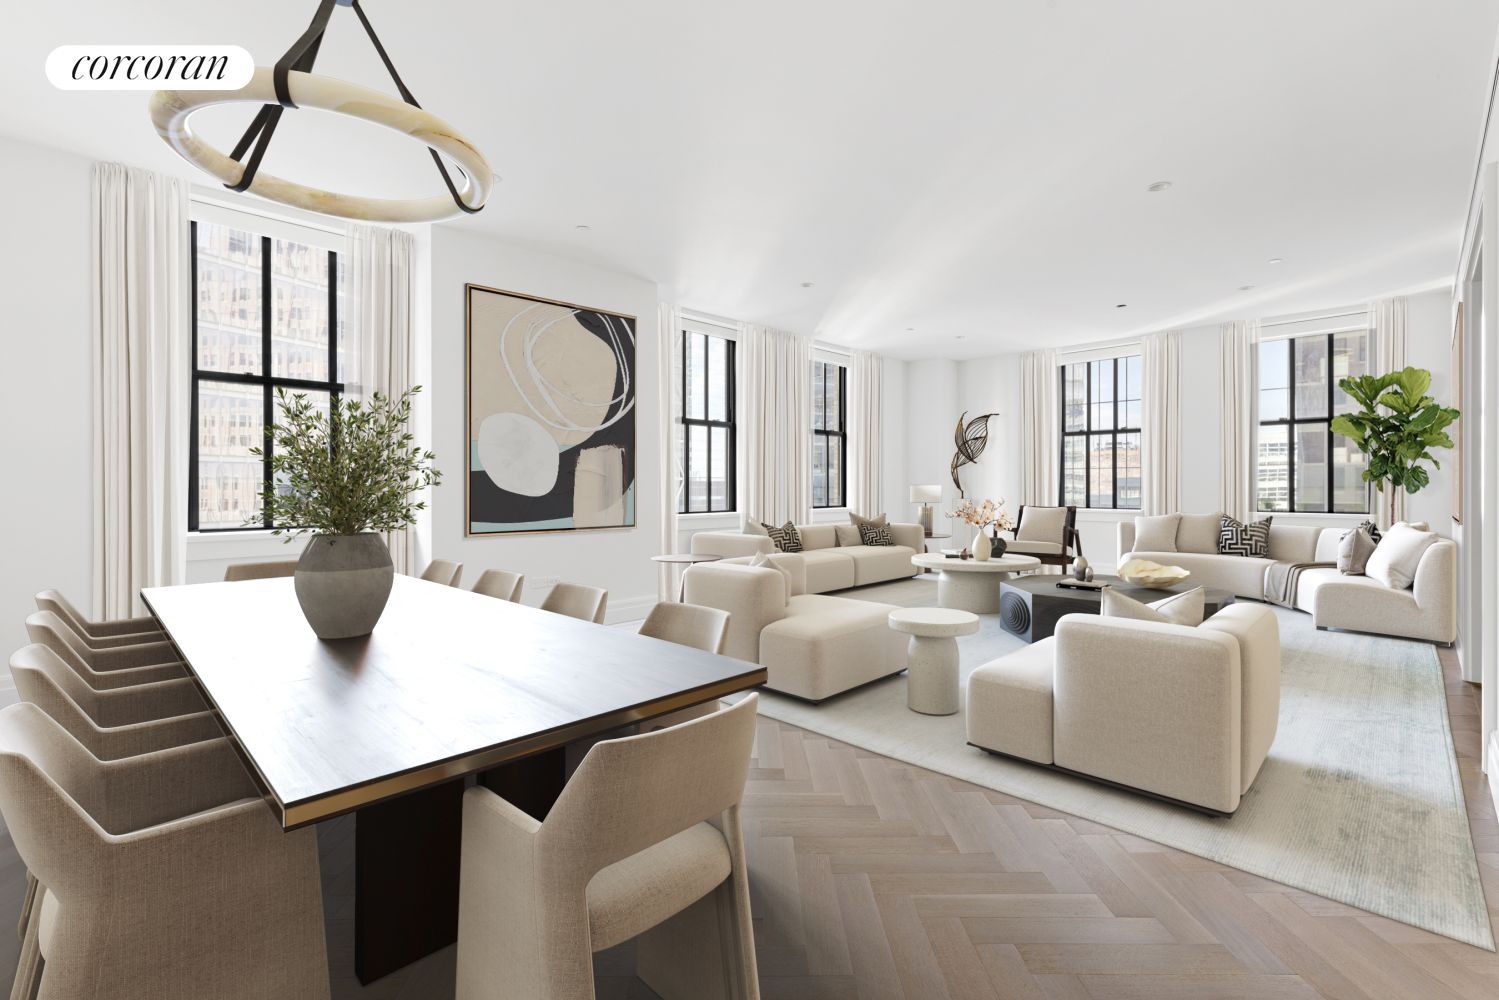 100 Barclay Street 20C, Tribeca, Downtown, NYC - 4 Bedrooms  
4.5 Bathrooms  
8 Rooms - 